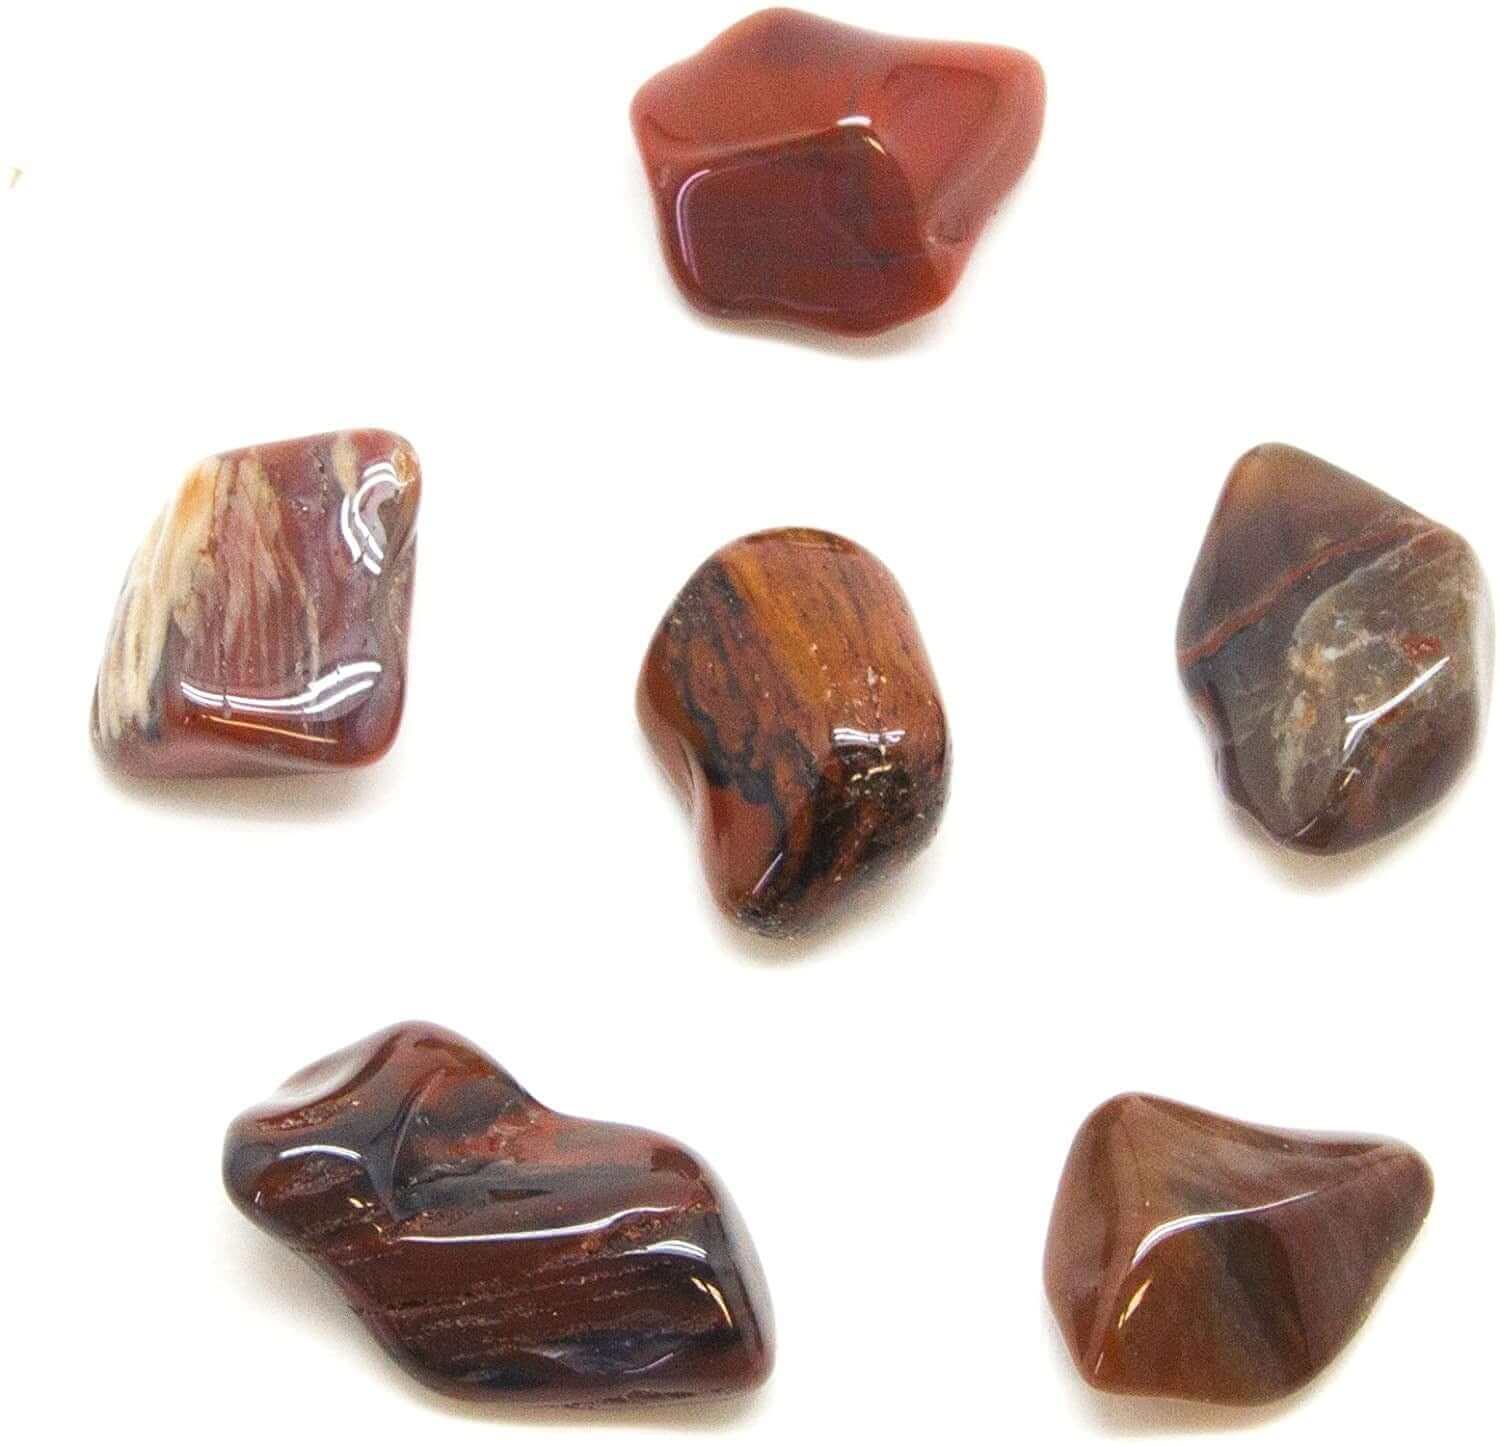 Petrified Wood Tumbled at $3 only from Spiral Rain